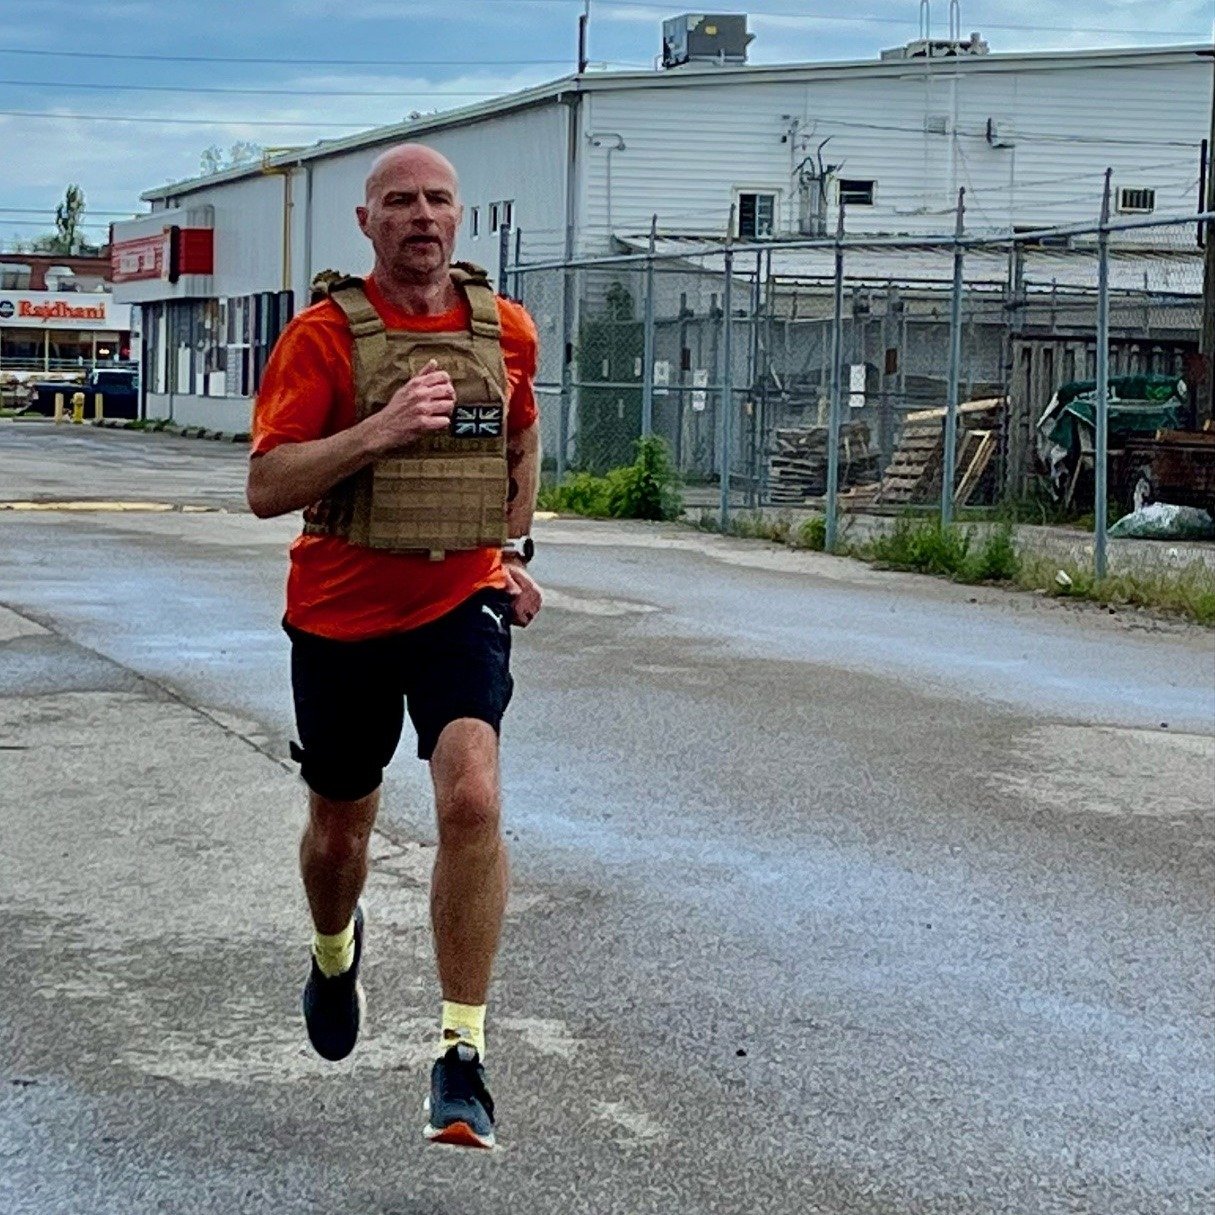 One more event is happening today! Please join us in giving Kudos to Kevin for participating in a Navy SEAL workout known across North America as &ldquo;Murph&rdquo;. The workout consists of:

1 mile run
100 pull ups
200 push ups
300 squats
1 mile ru